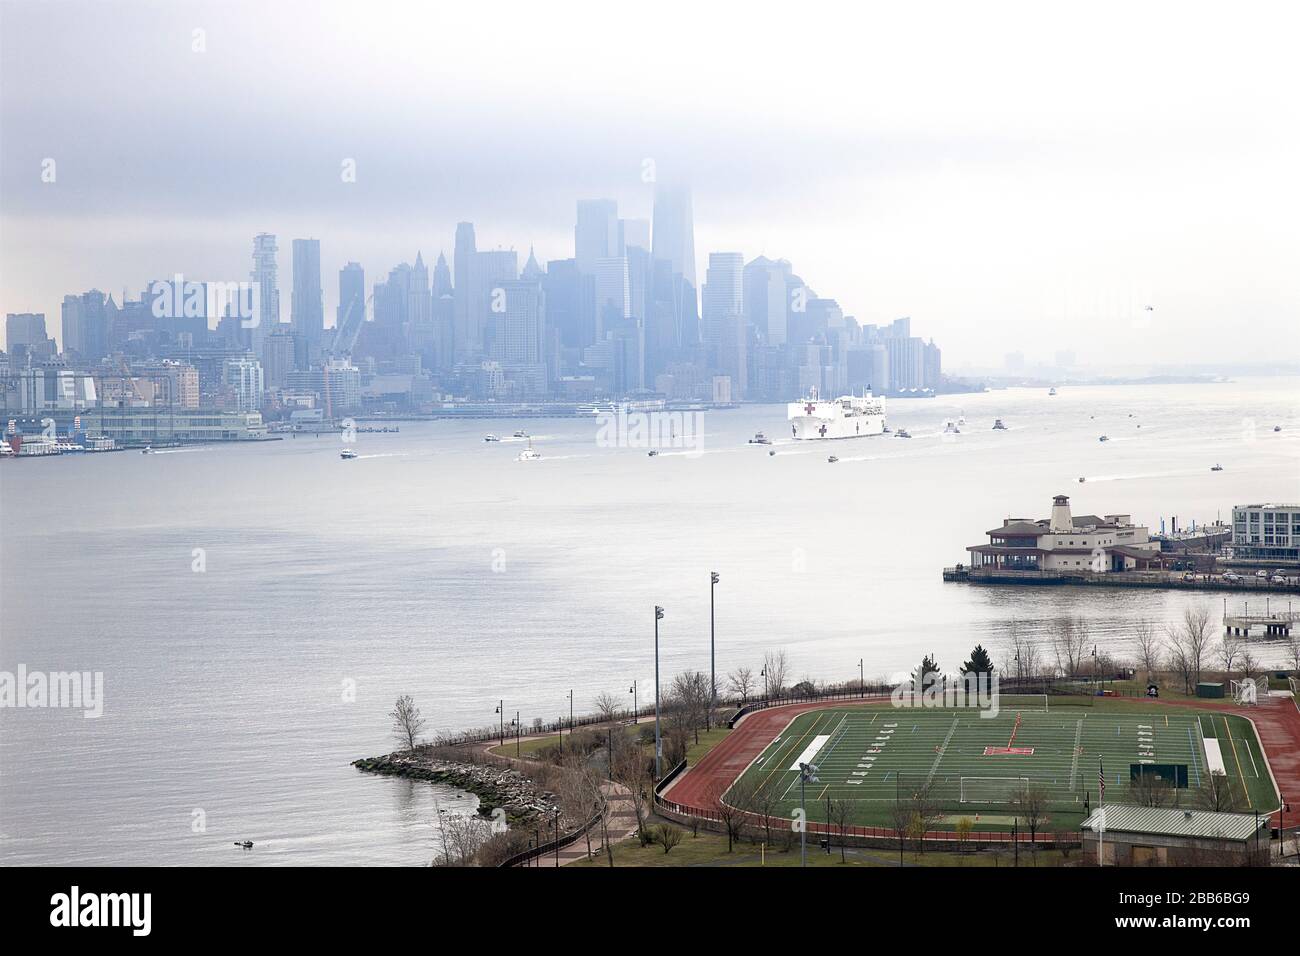 USNS Comfort NYC - Mother nature added to the somber mood as the US Naval Hospital Ship Comfort arrives in Manhattan in New York City. Stock Photo